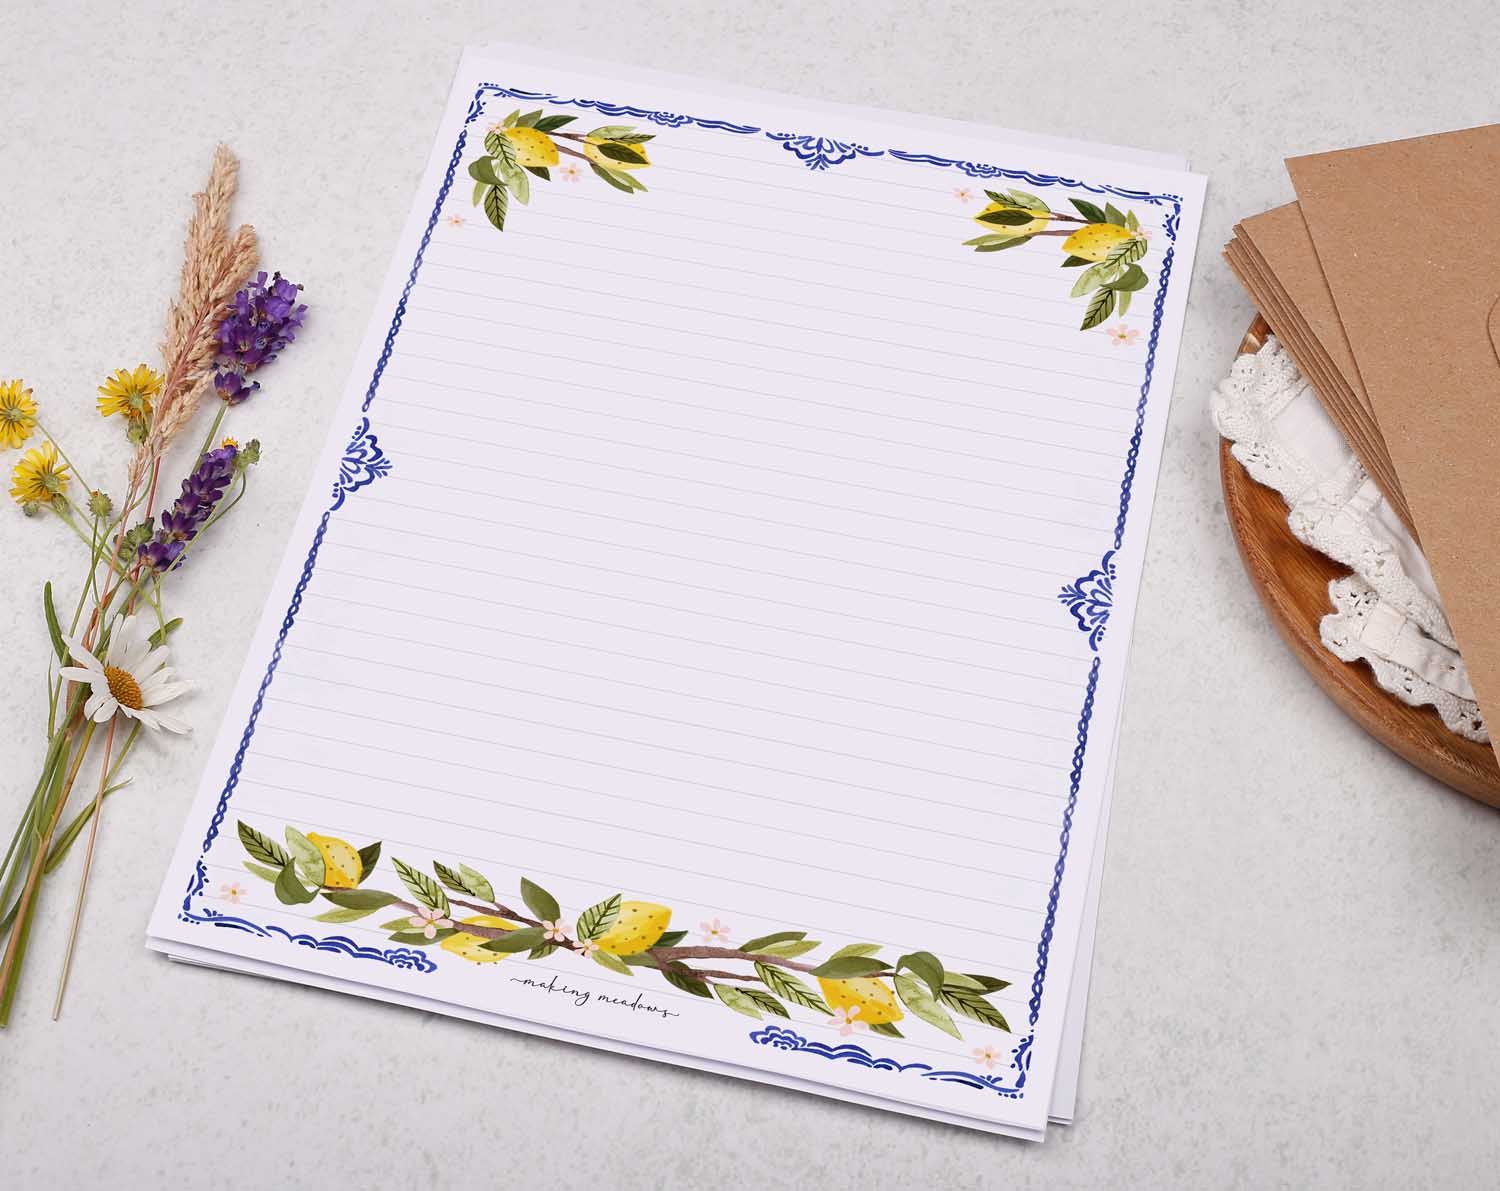 A4 letter writing paper sheets with a border of botanical lemons. A super cute Mediterranean design